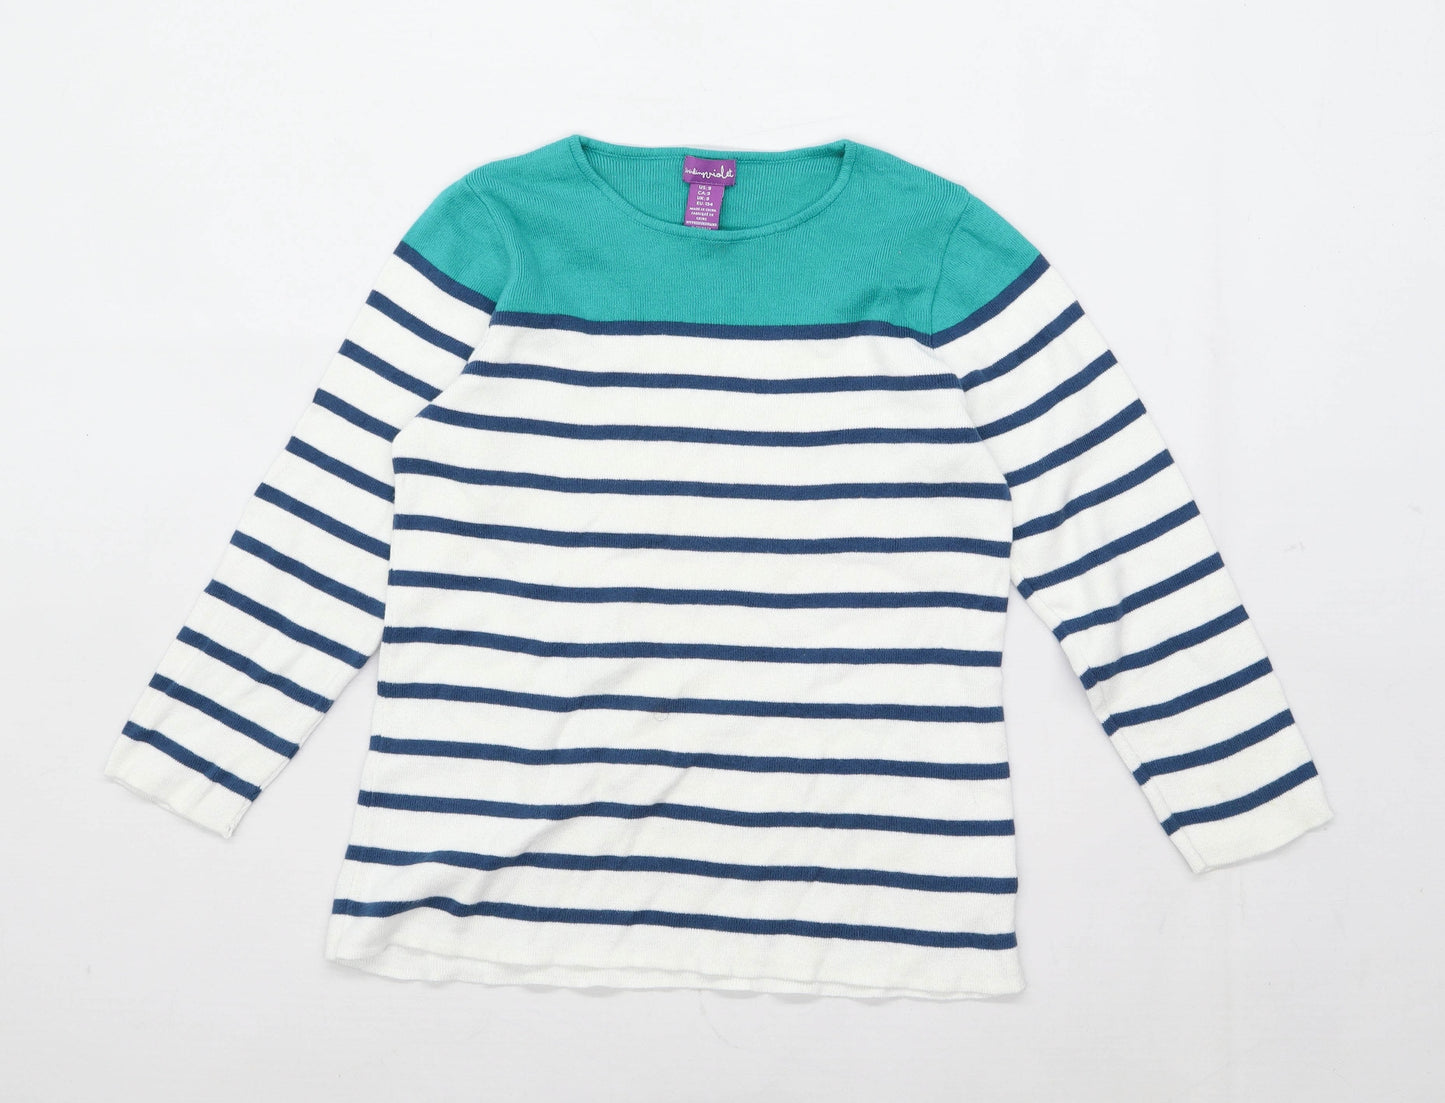 Shrinking Violet Girls Striped Multi-Coloured Top Age 9 Years